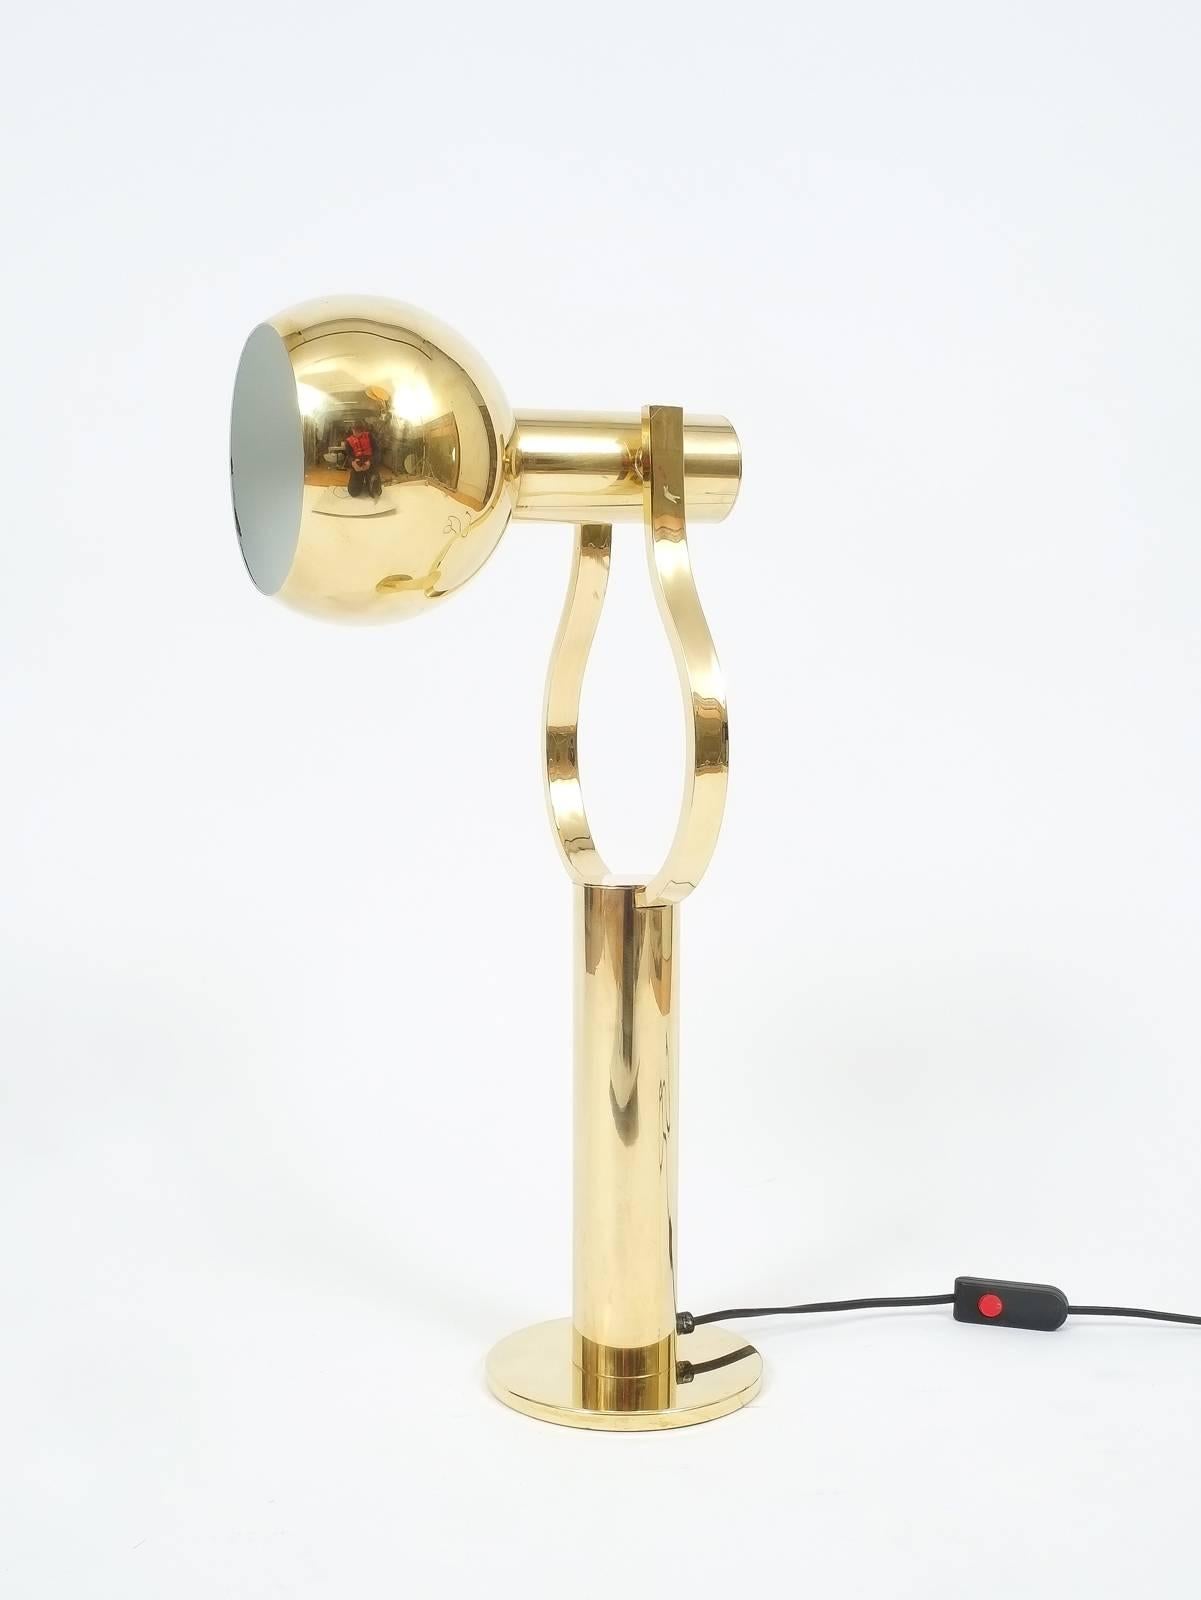 Pair of Articulate Refurbished Brass Desk Lamps by Staff, Germany, 1970 (Deutsch)